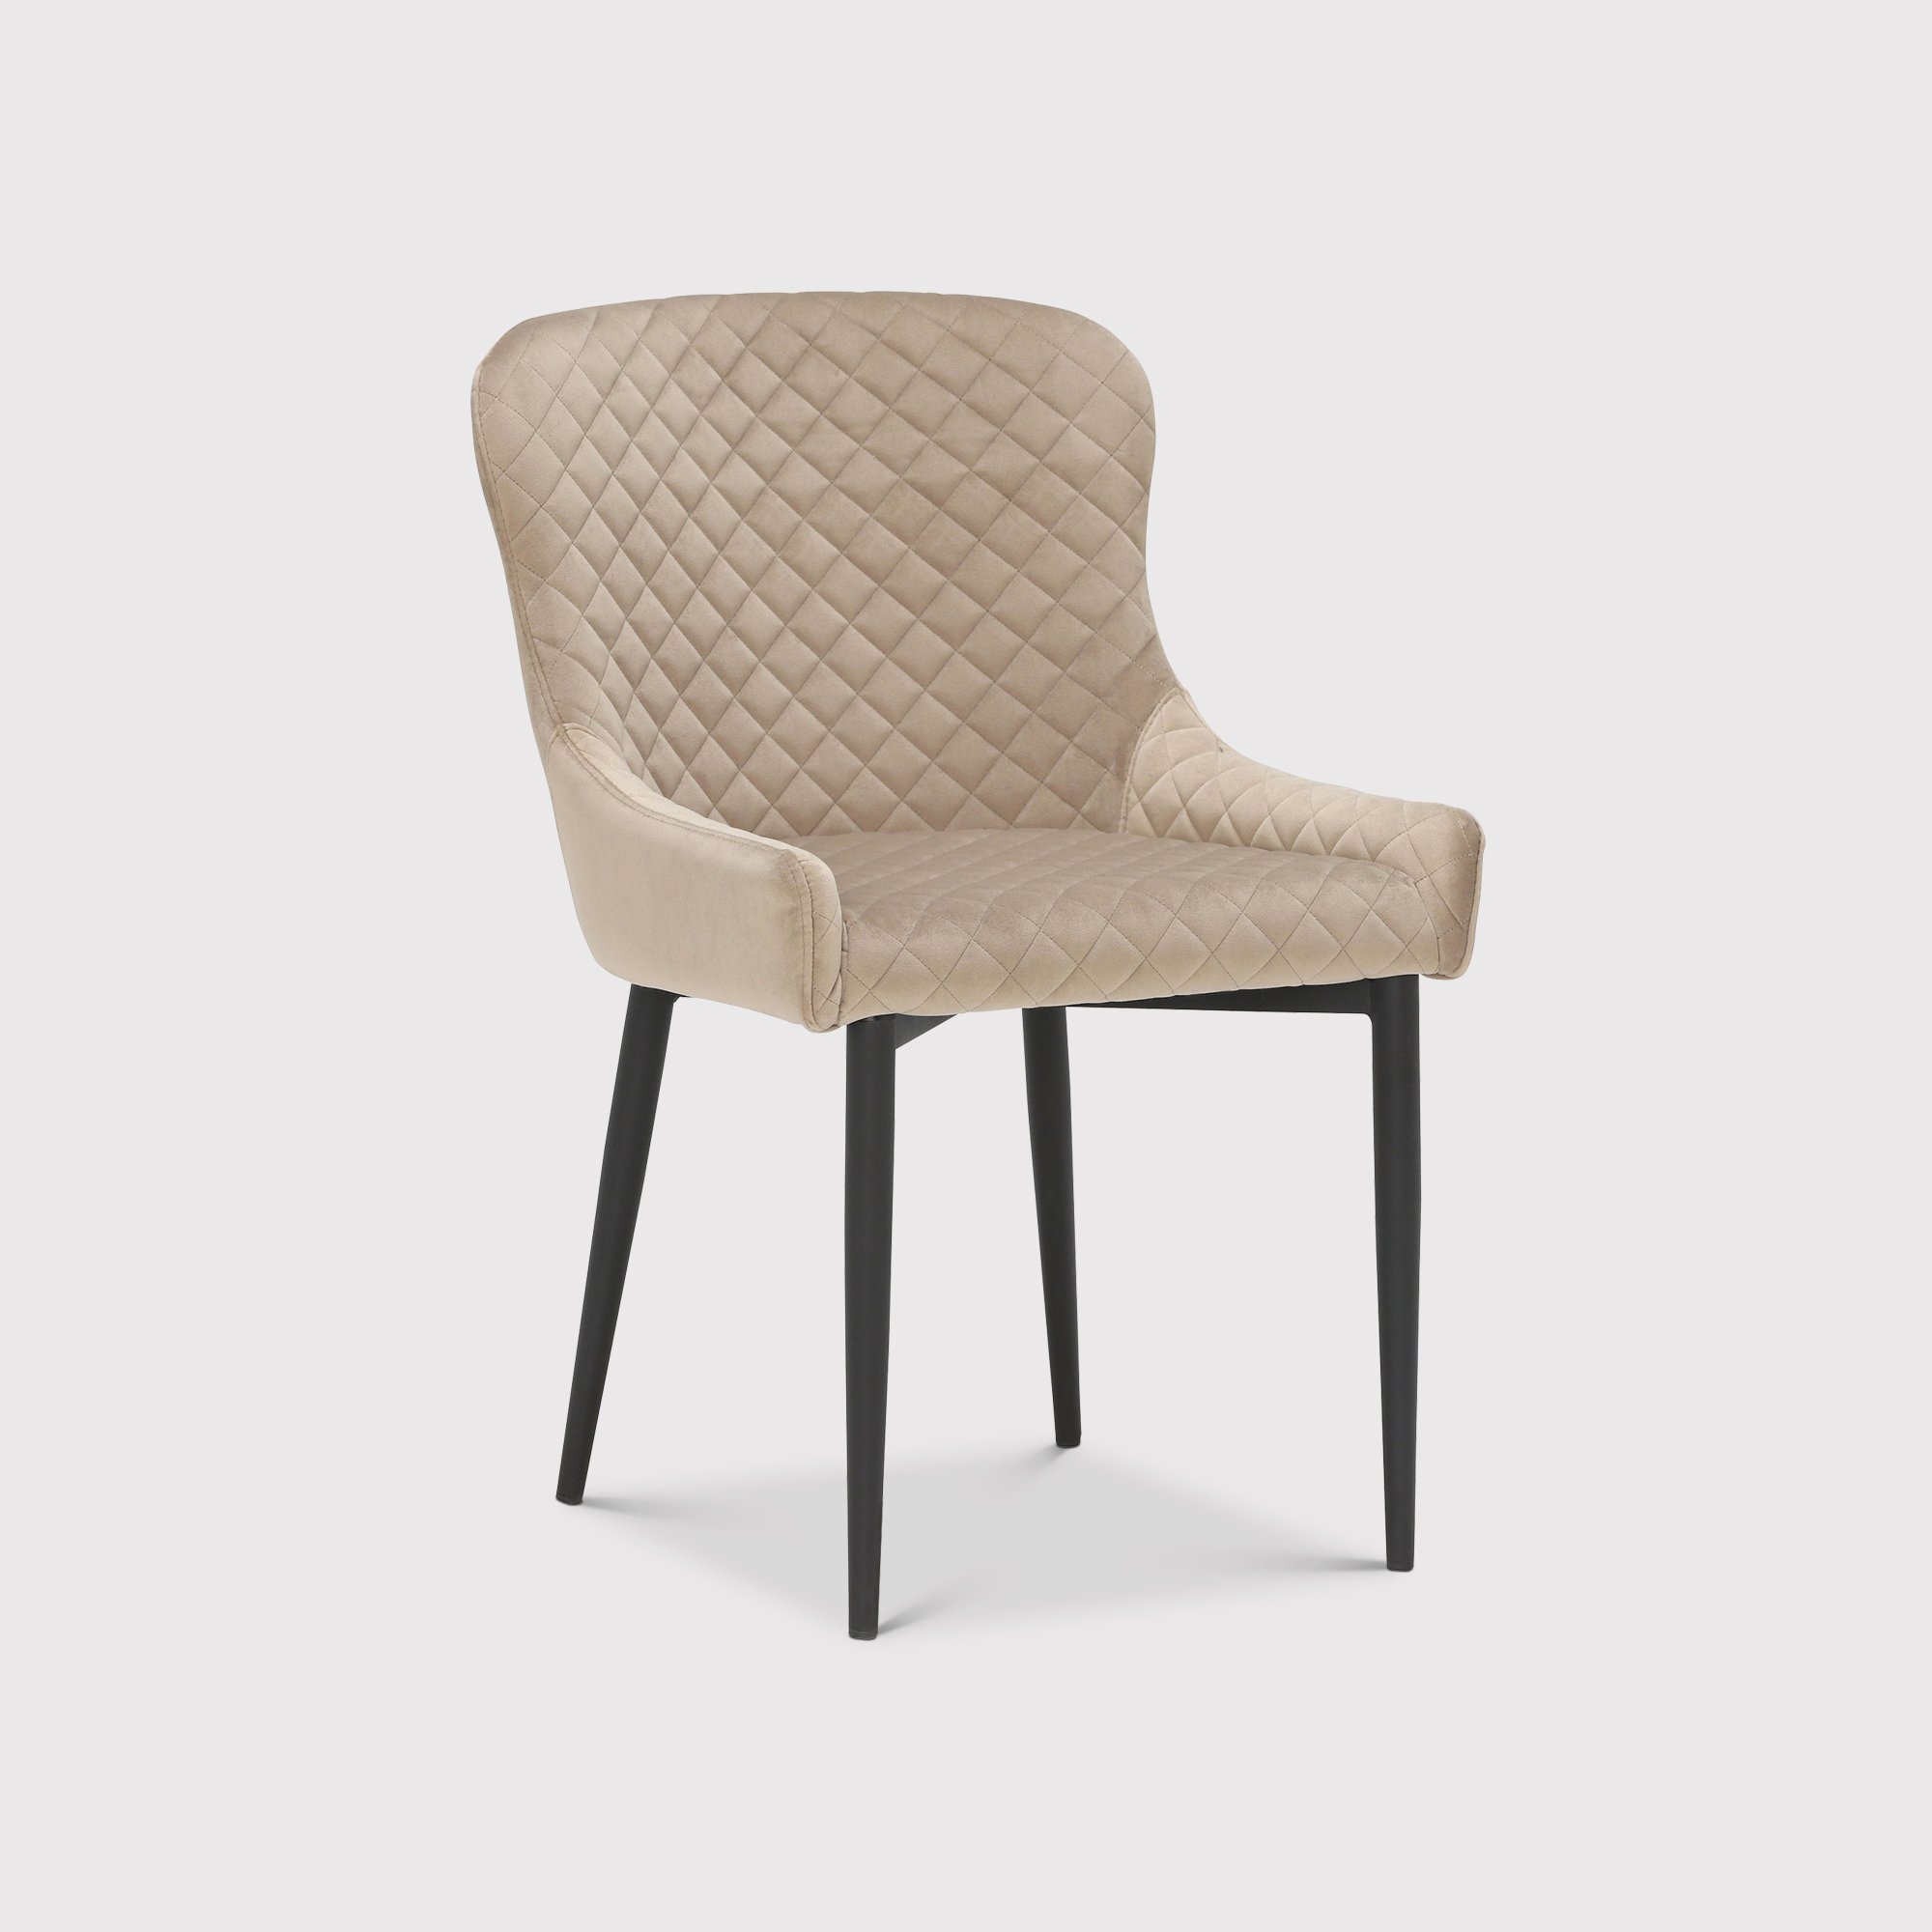 Photo of Rivington dining chair in neutral